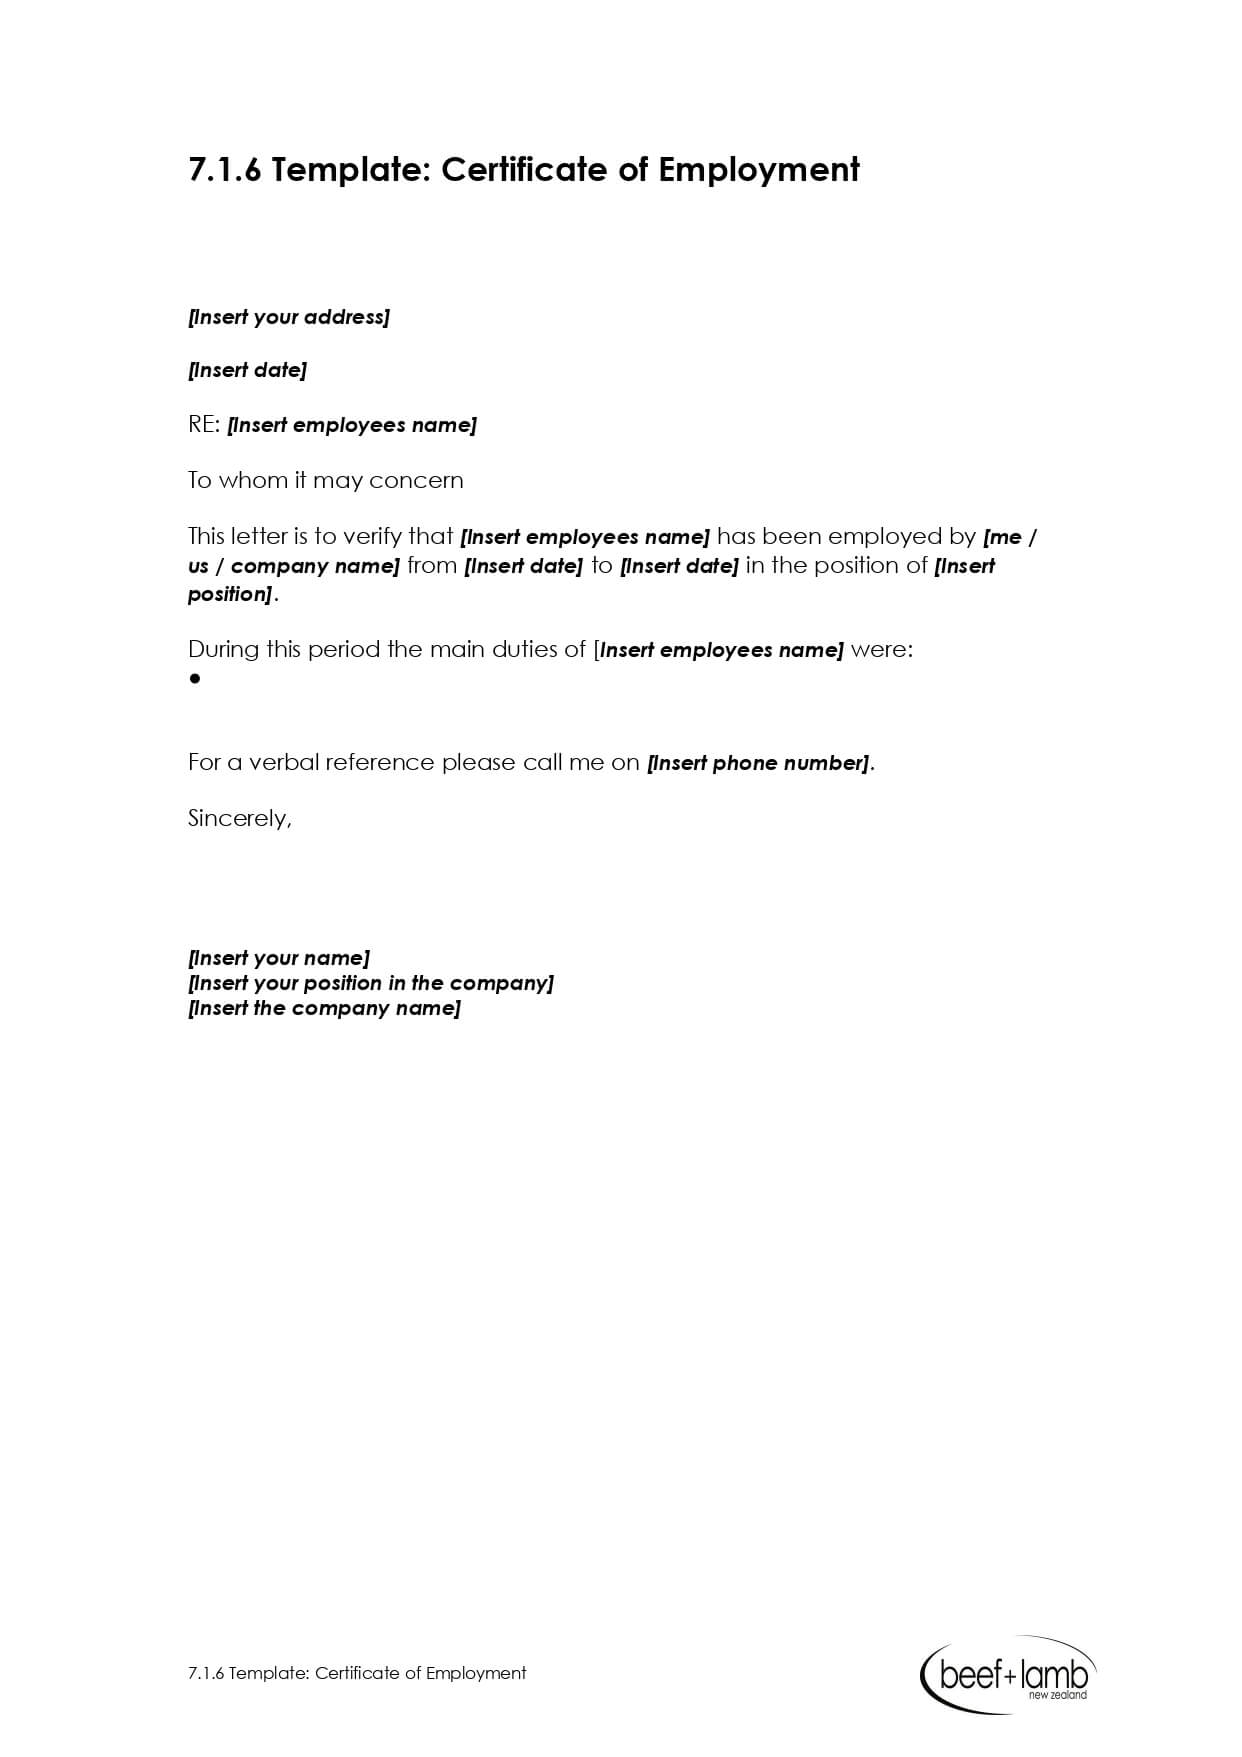 Editable Certificate Of Employment Template - Google Docs Pertaining To Template Of Certificate Of Employment